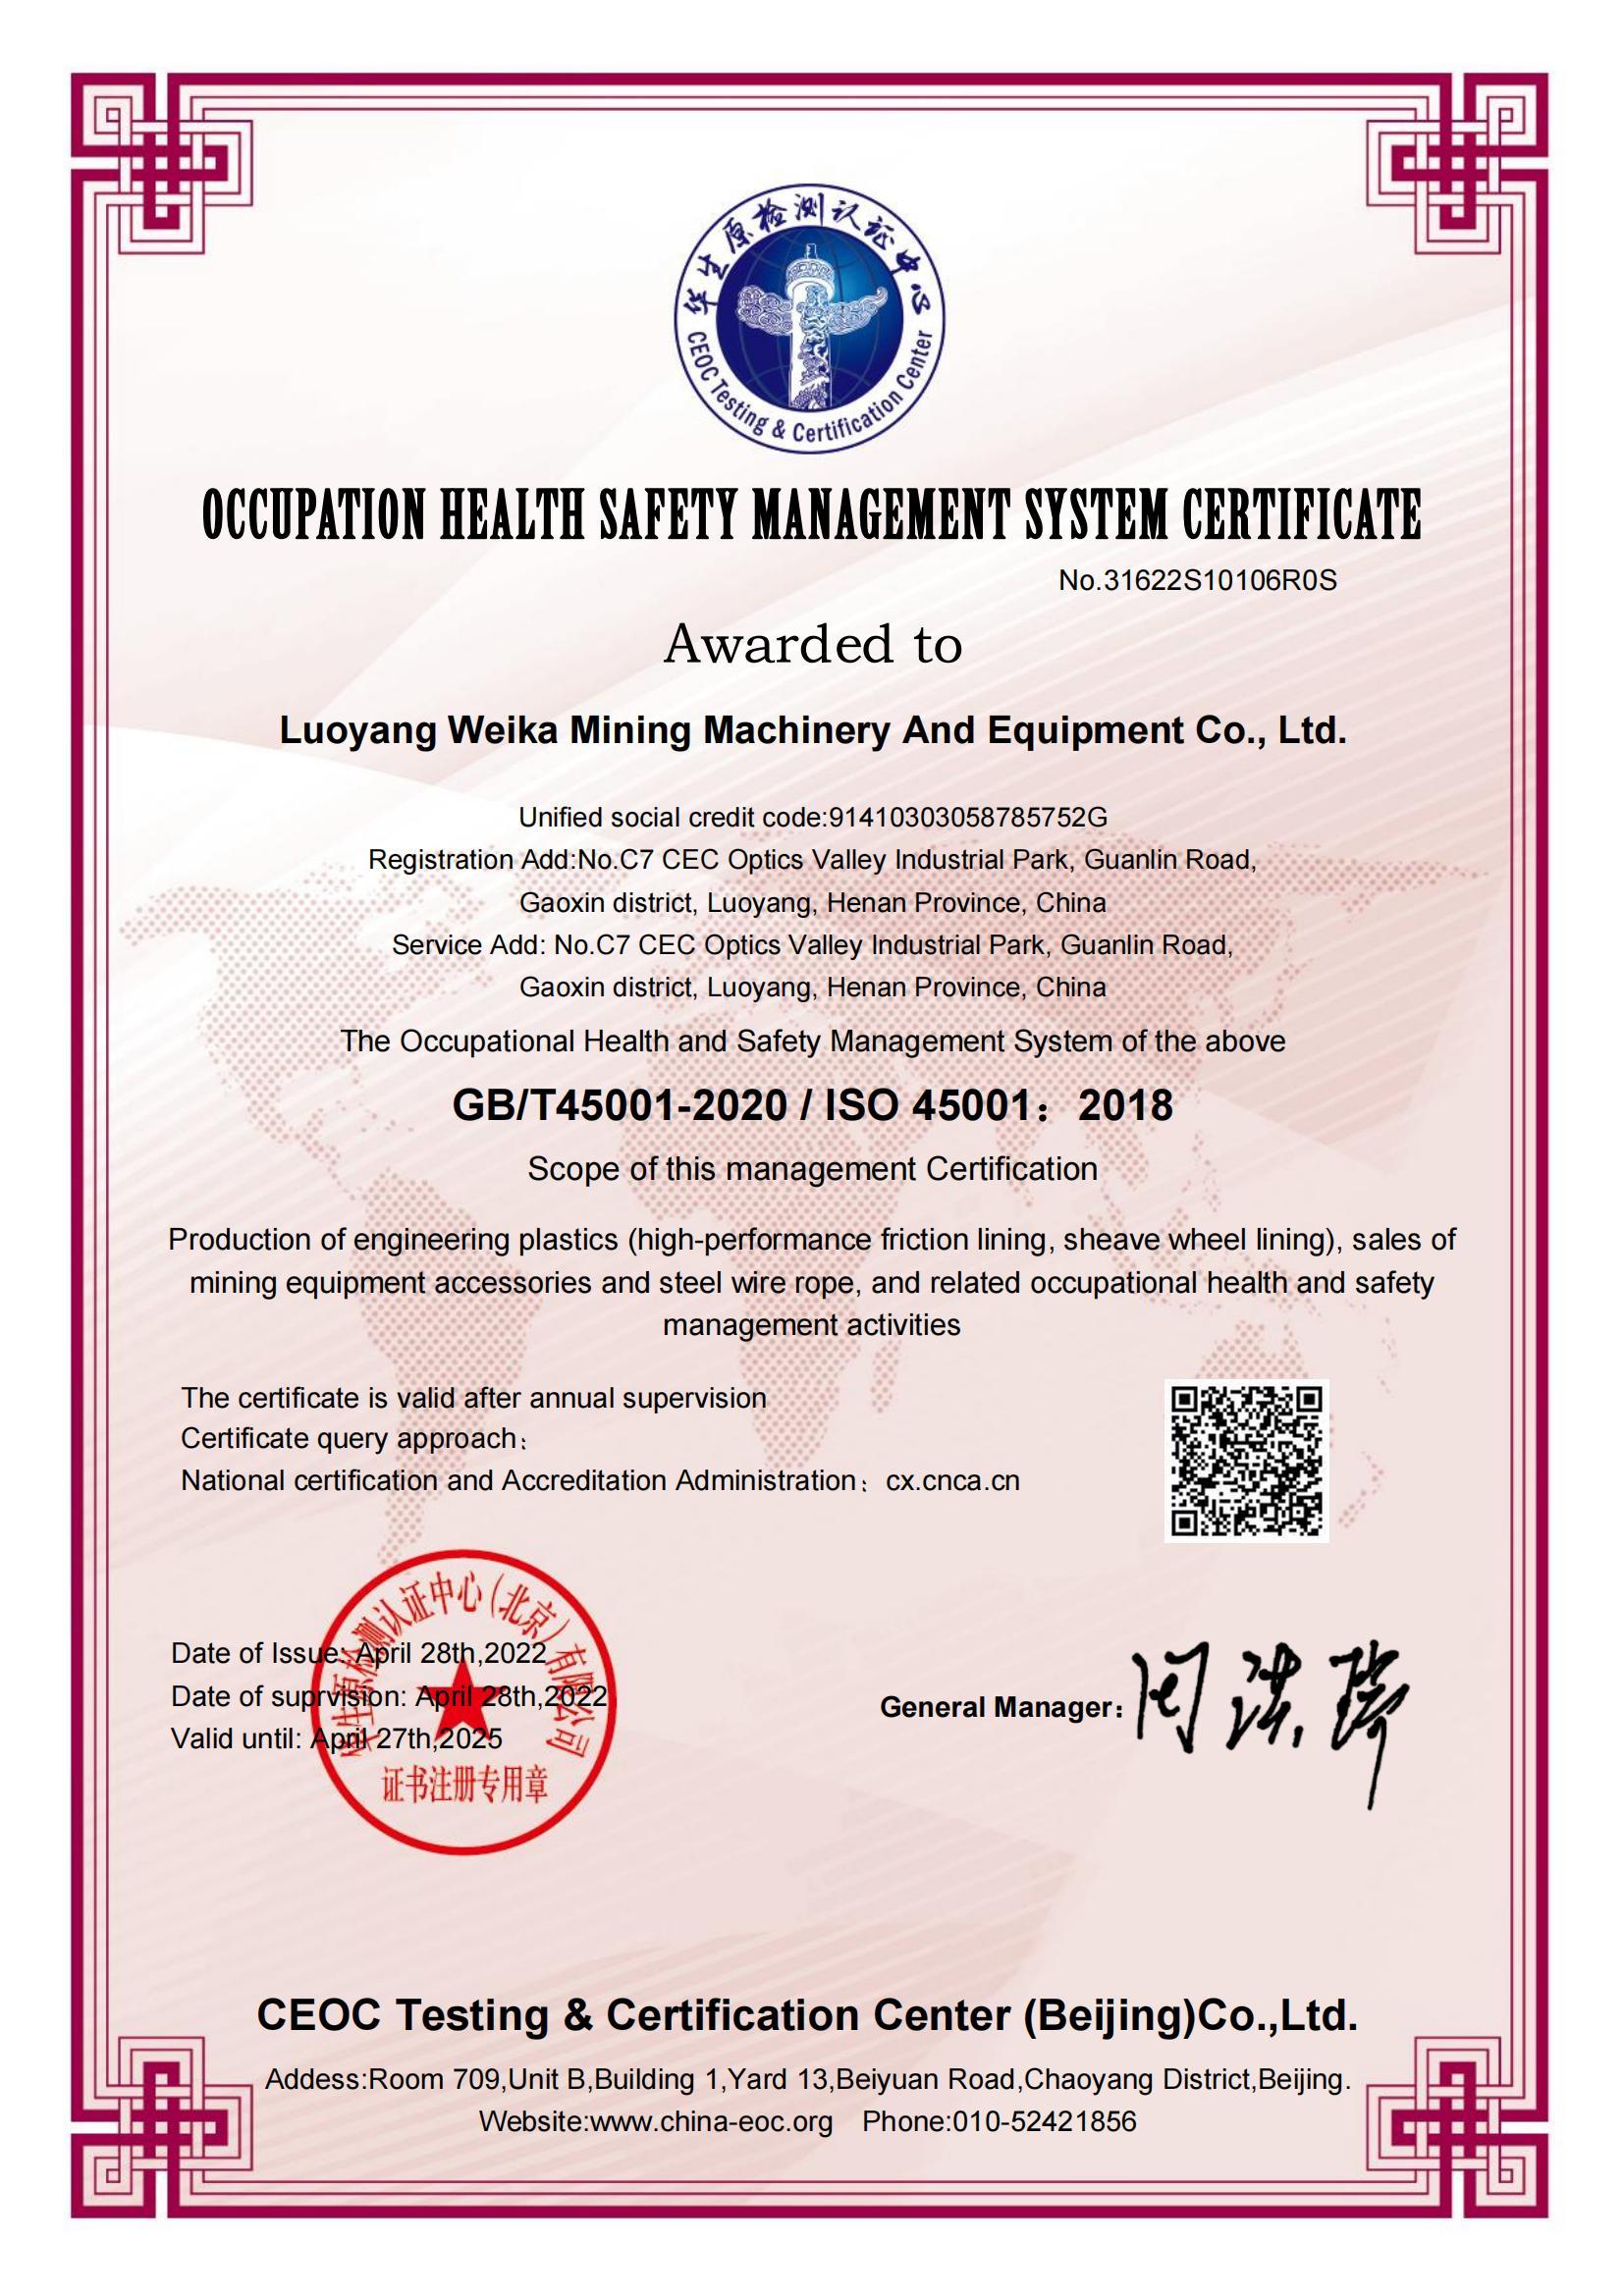 Luoyang Weika Mining Machinery Equipment Co., Ltd. passed the ISO45001 occupational health and safety management system certification on April 28, 2022.